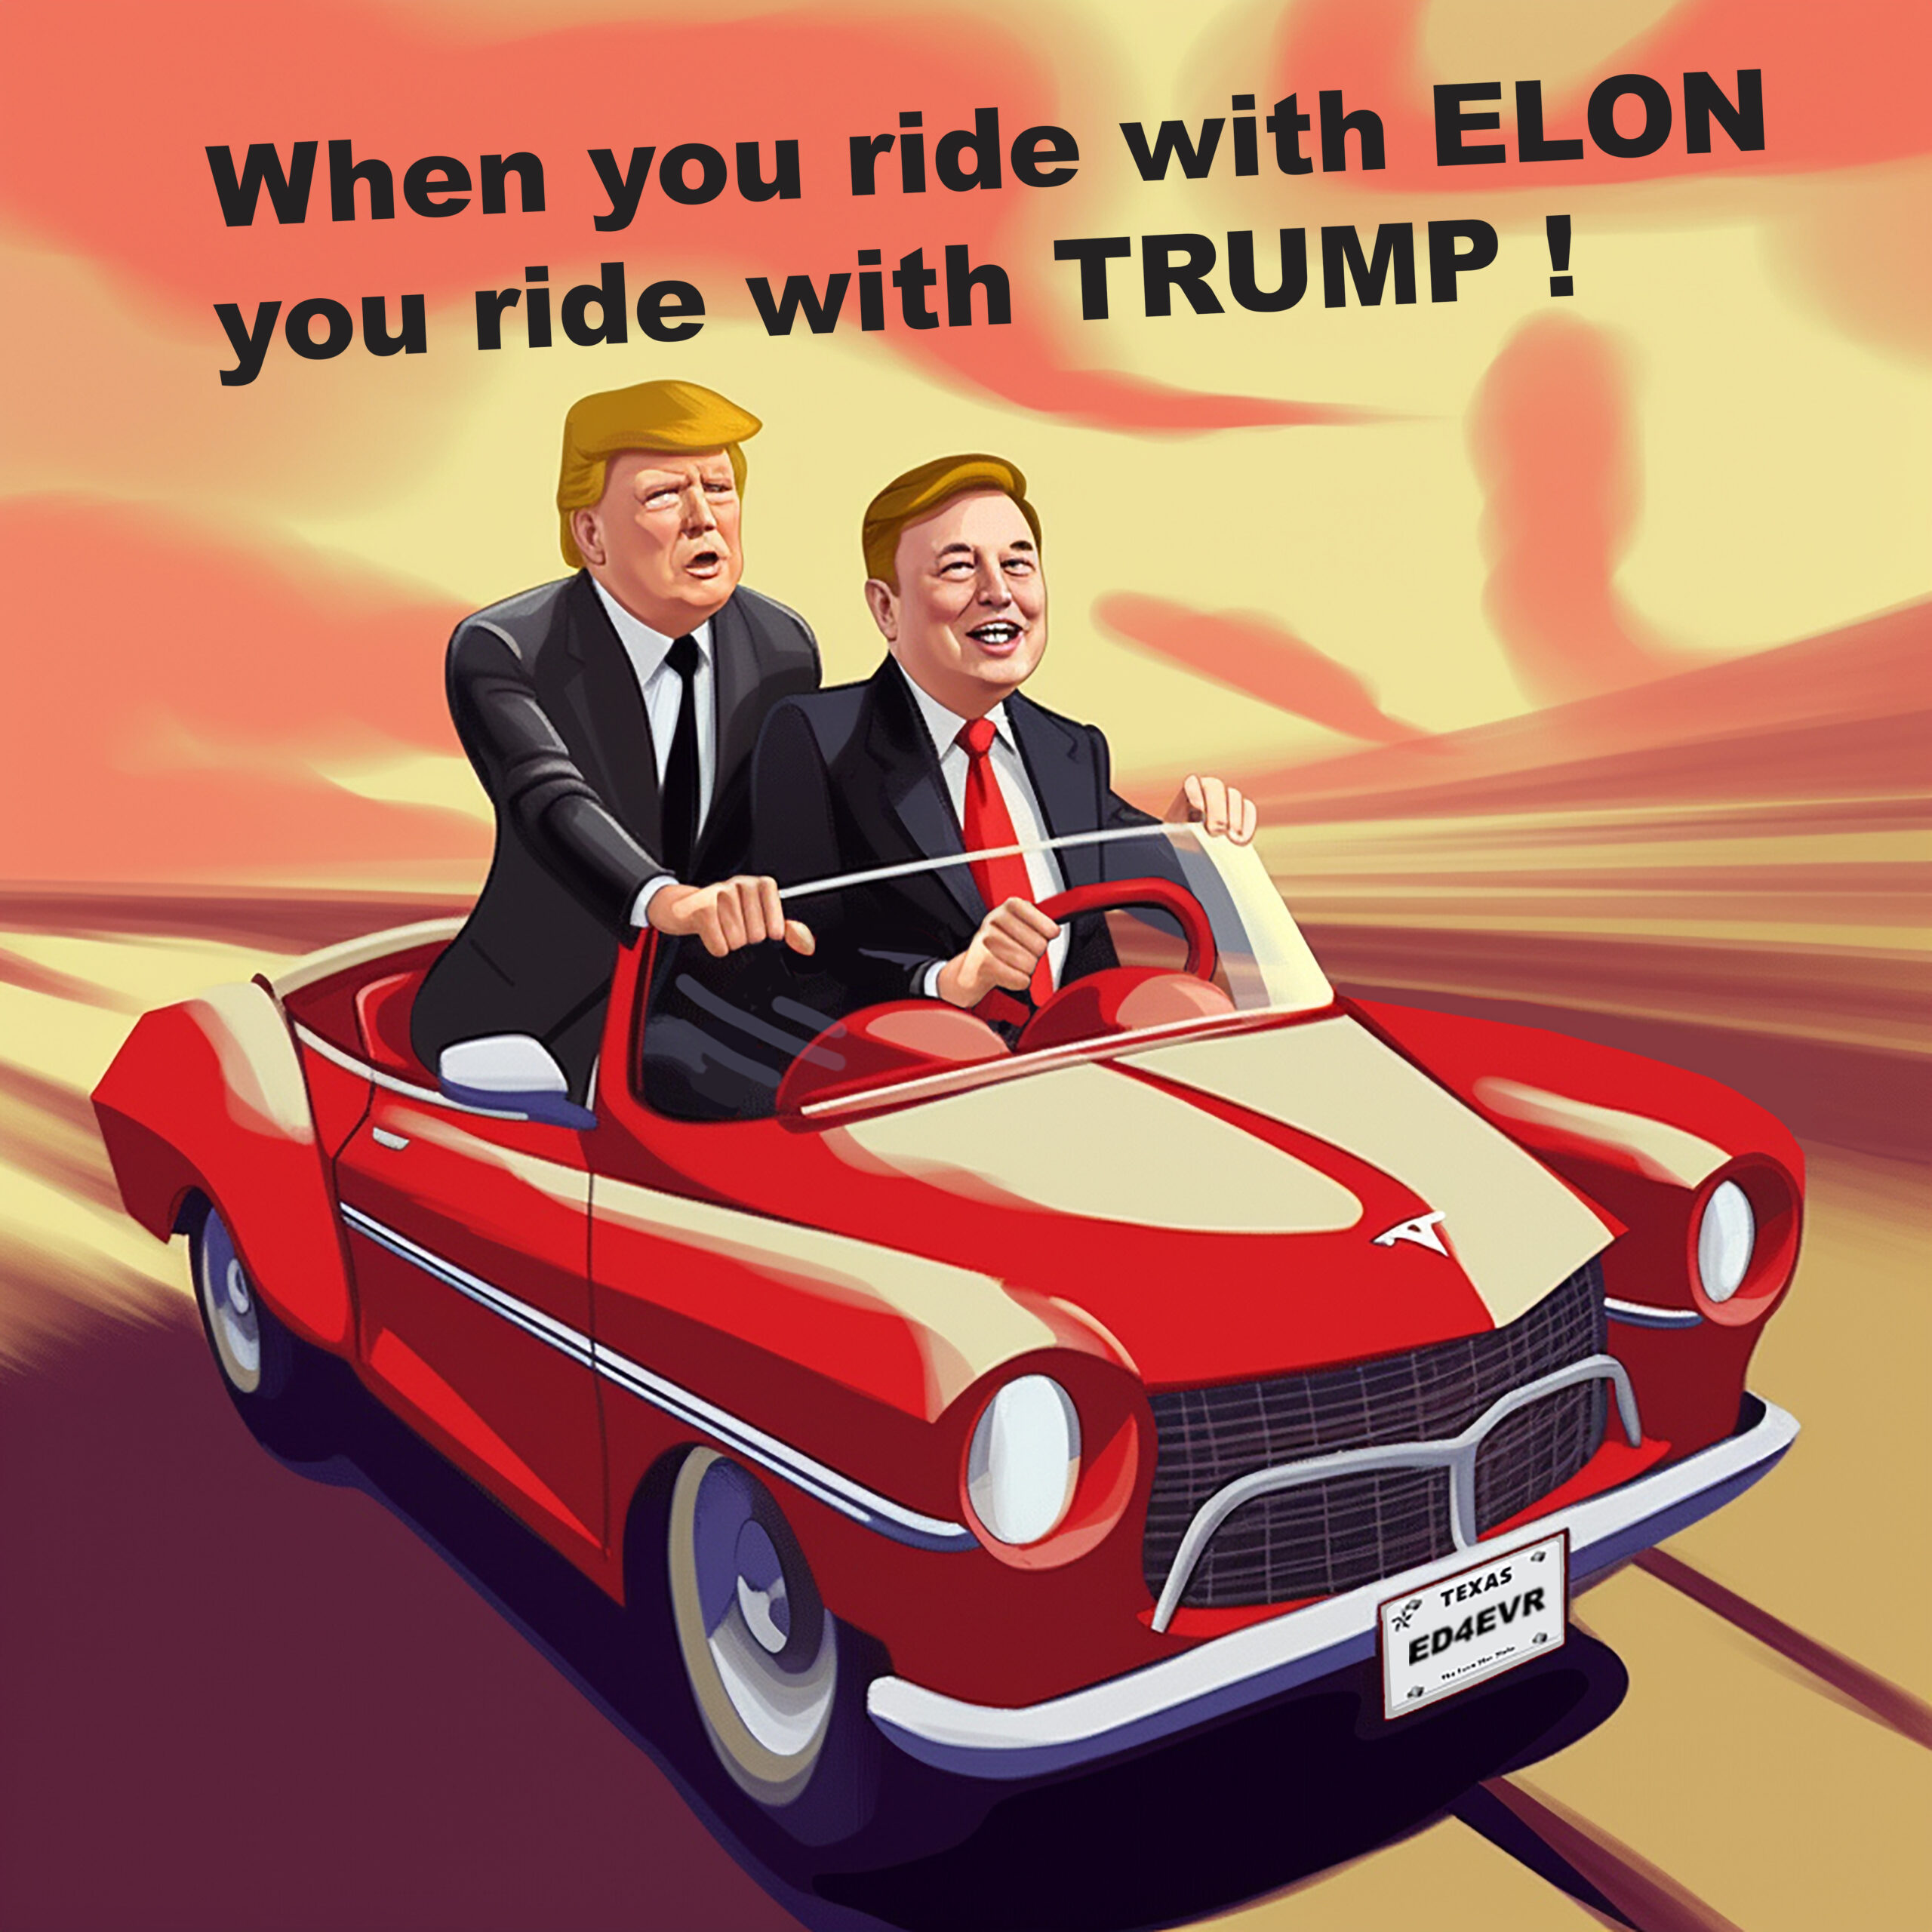 When you ride with Elon you ride with Trump